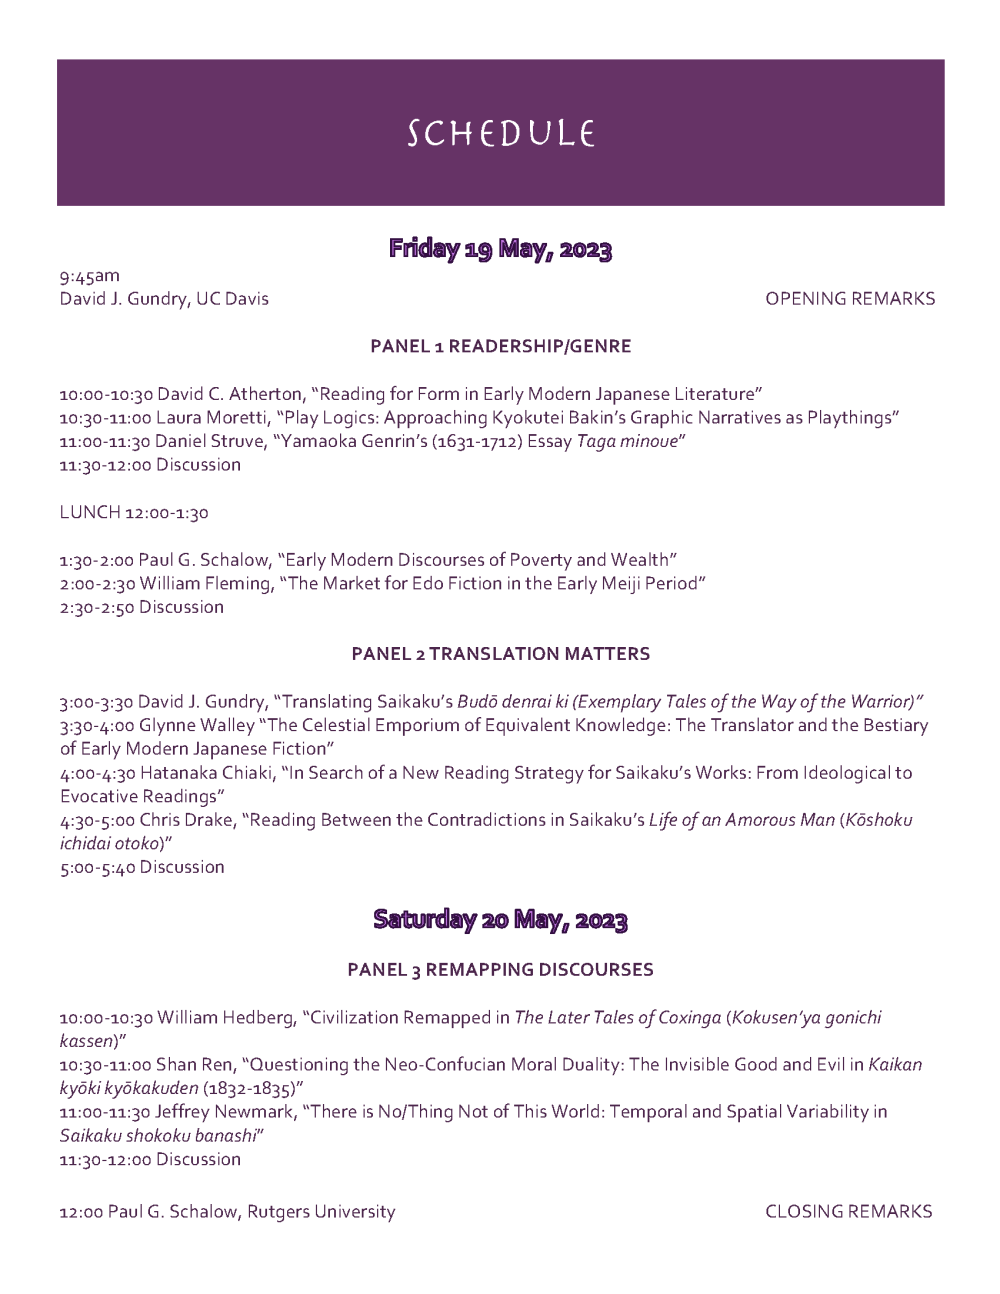 in image of the schedule of events